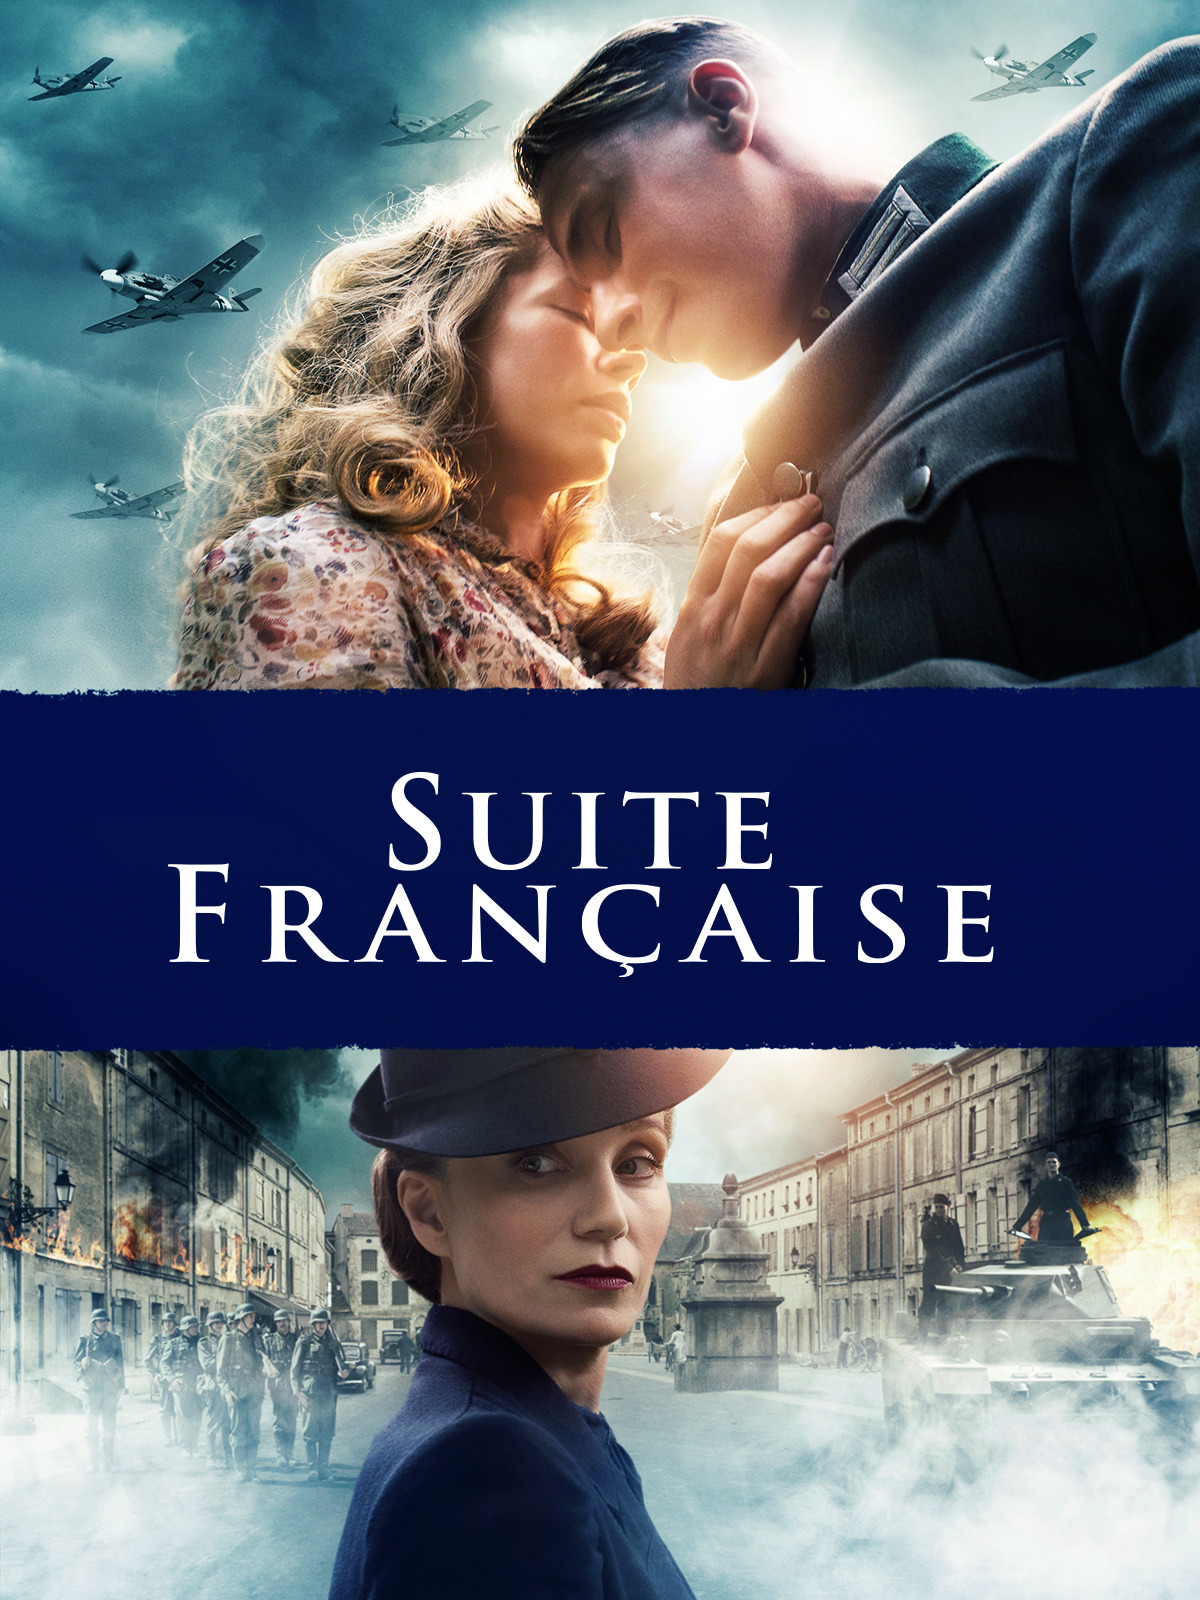 amber guise share suite francaise english subtitles photos